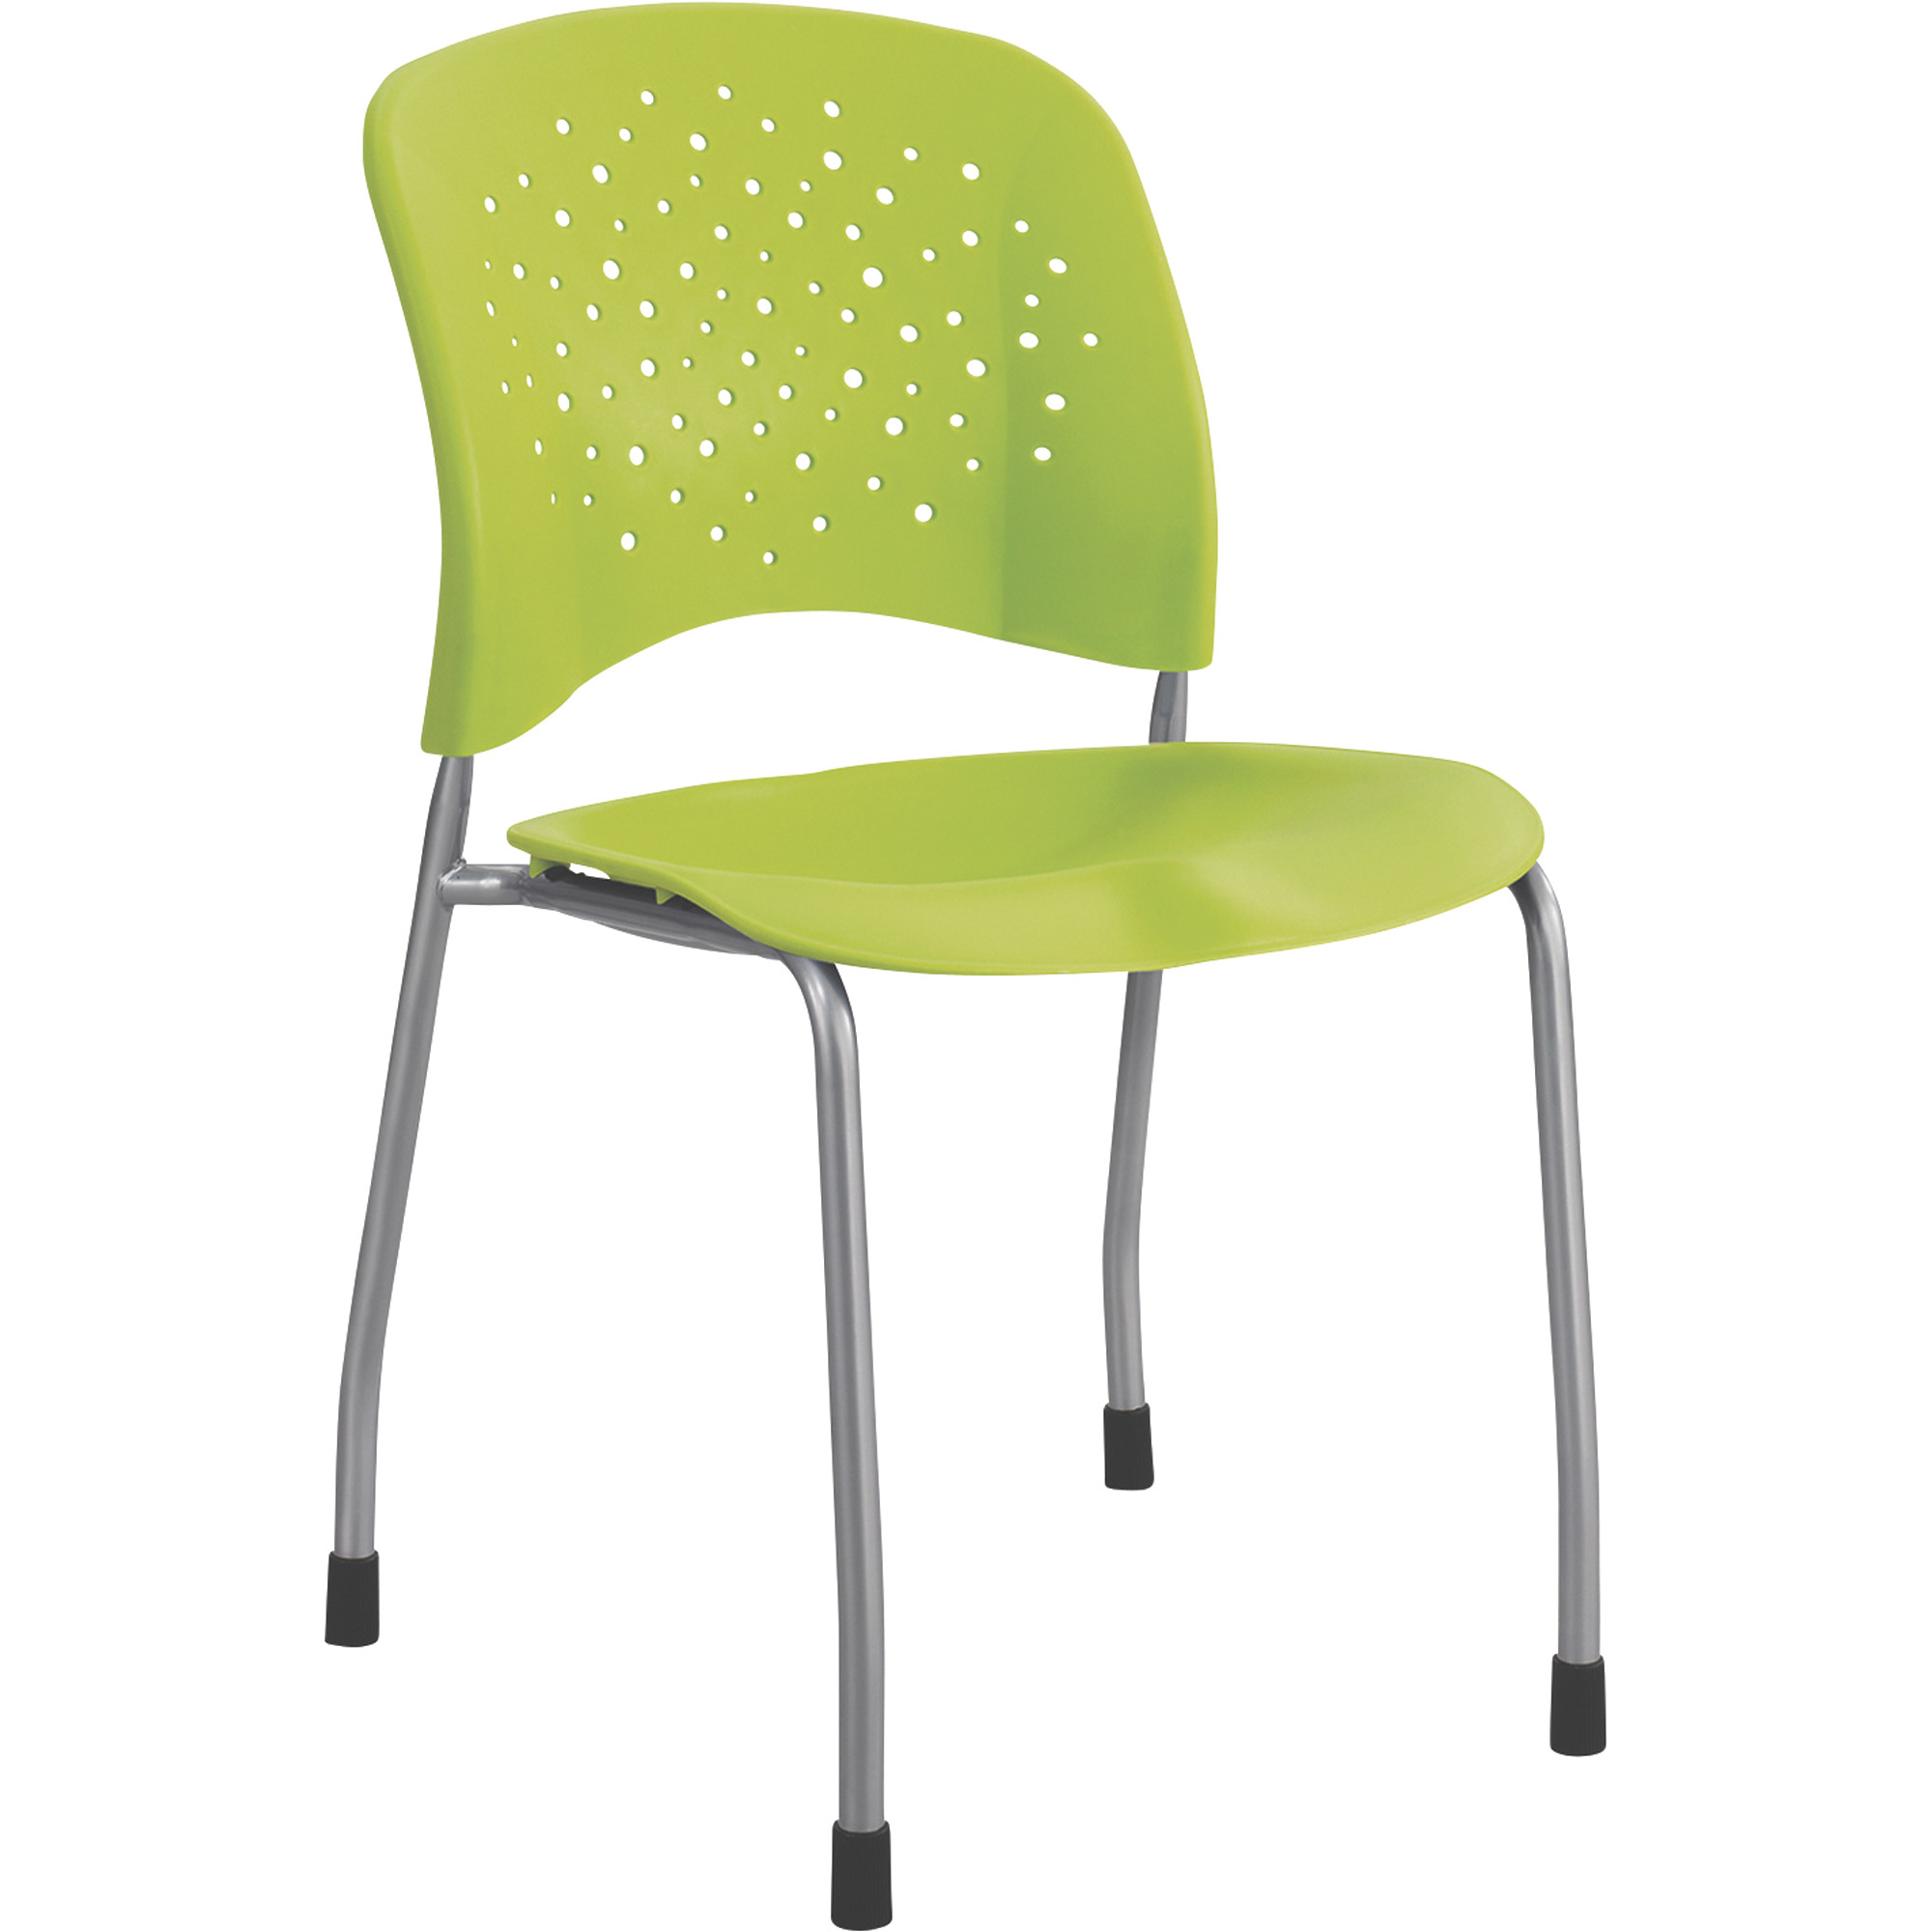 Safco Reve Guest Chairs with Straight Legs and Round Back — Set of 2, Green, Model 6805GN -  Mayline Safco